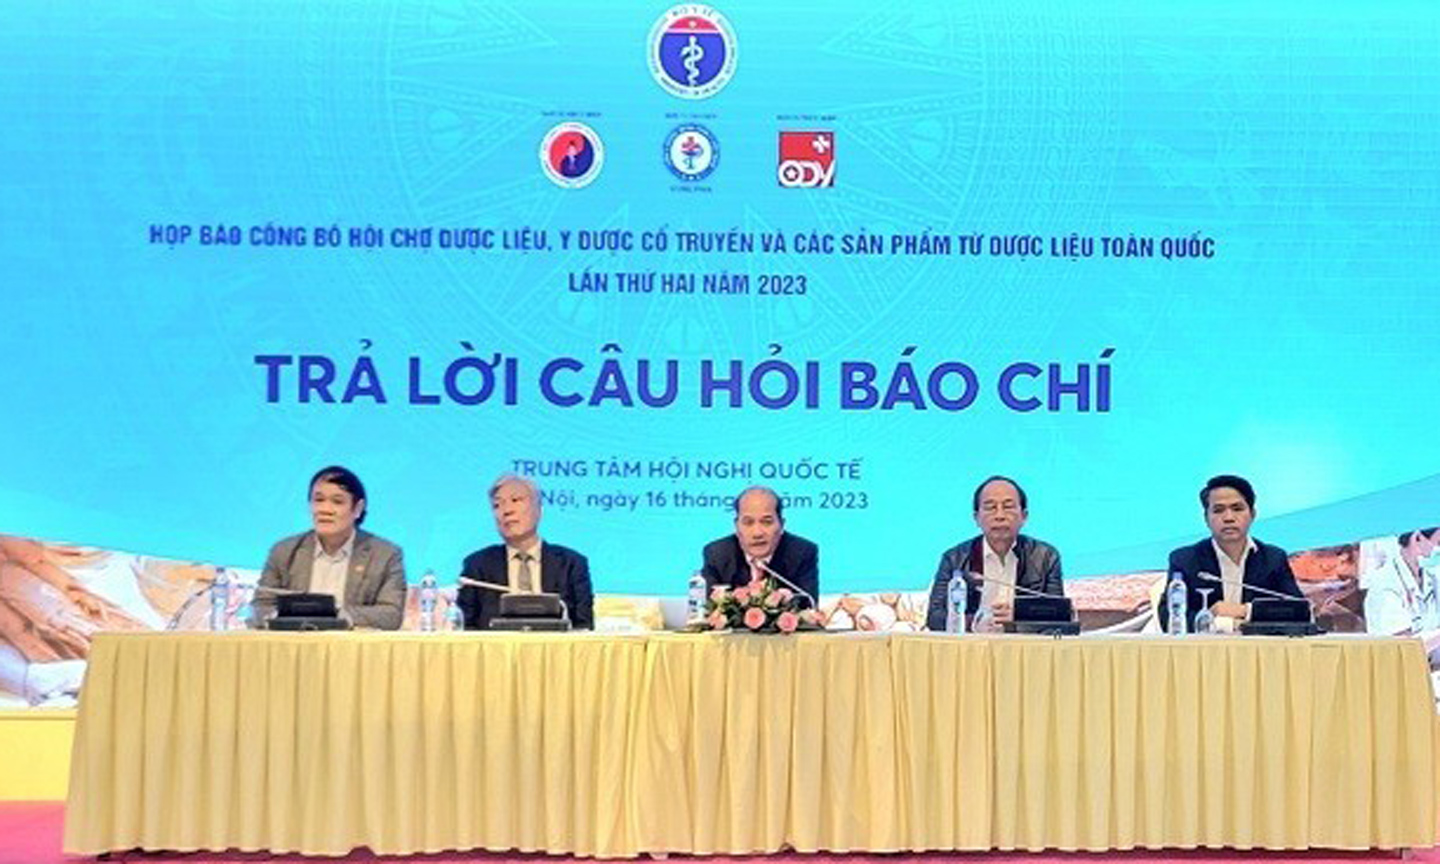 At the press briefing held in Hanoi on November 16.